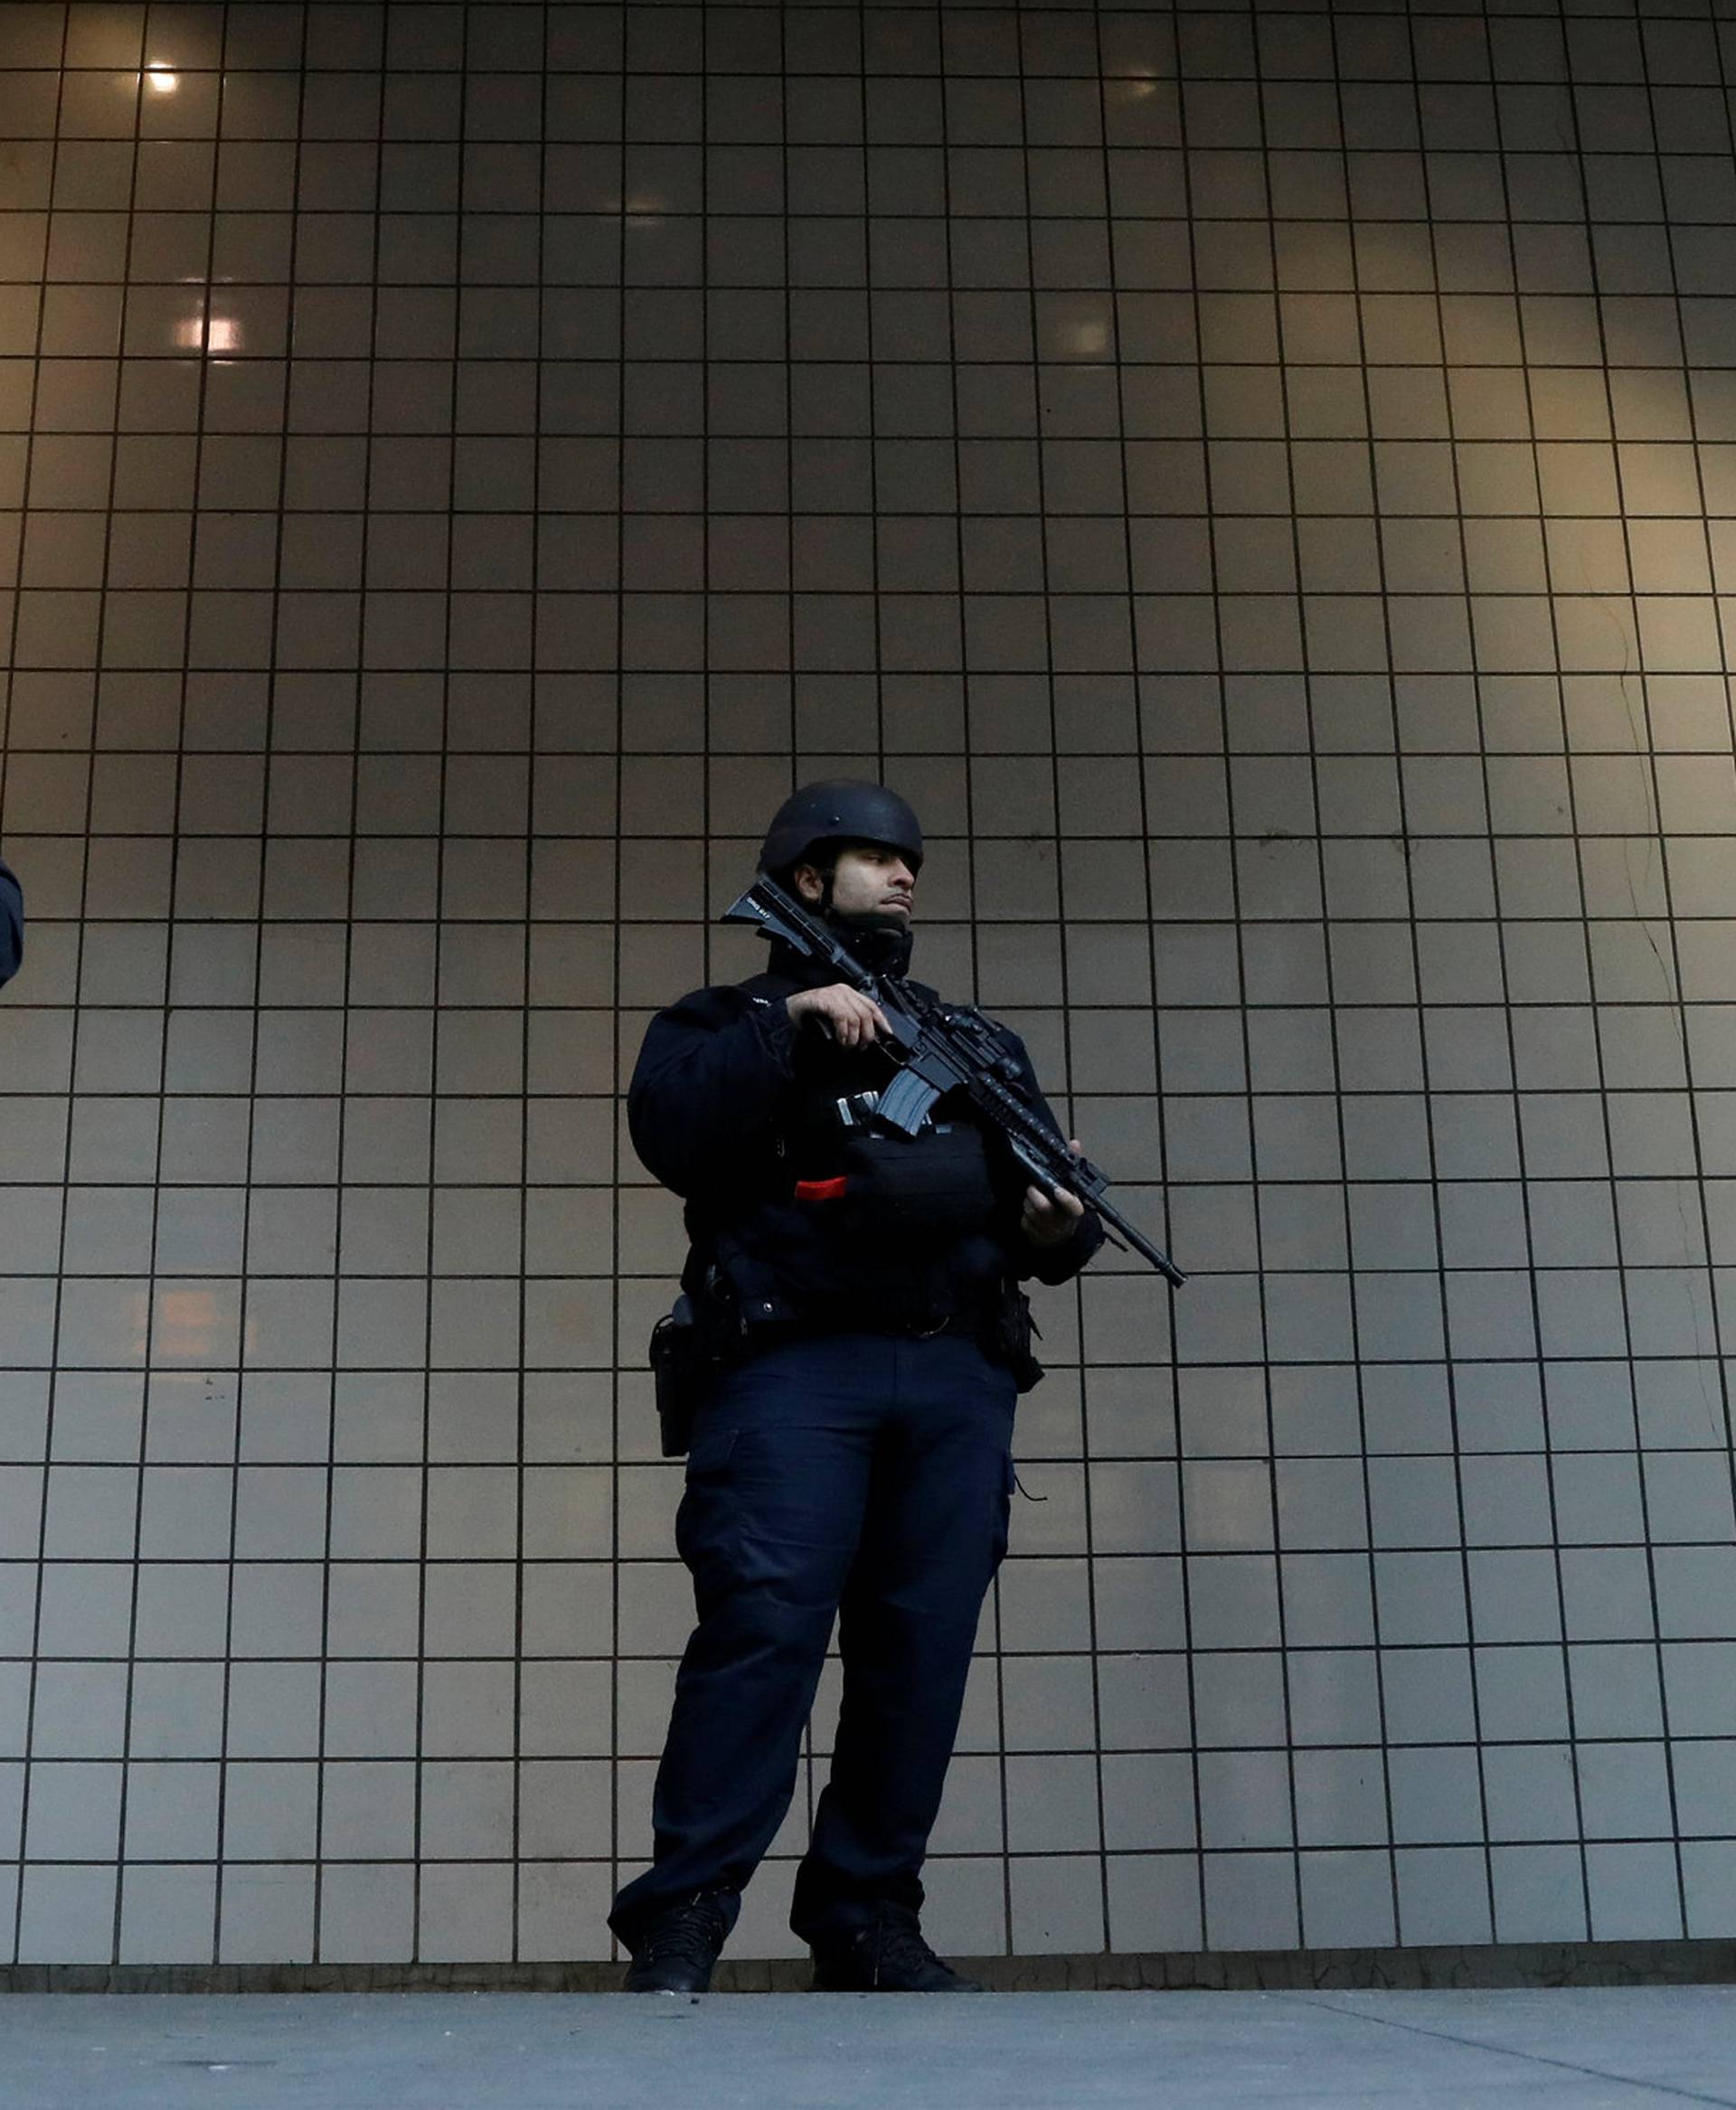 Police officers stand guard outside the closed New York Port Authority Subway entrance following an reported explosion, in New York City